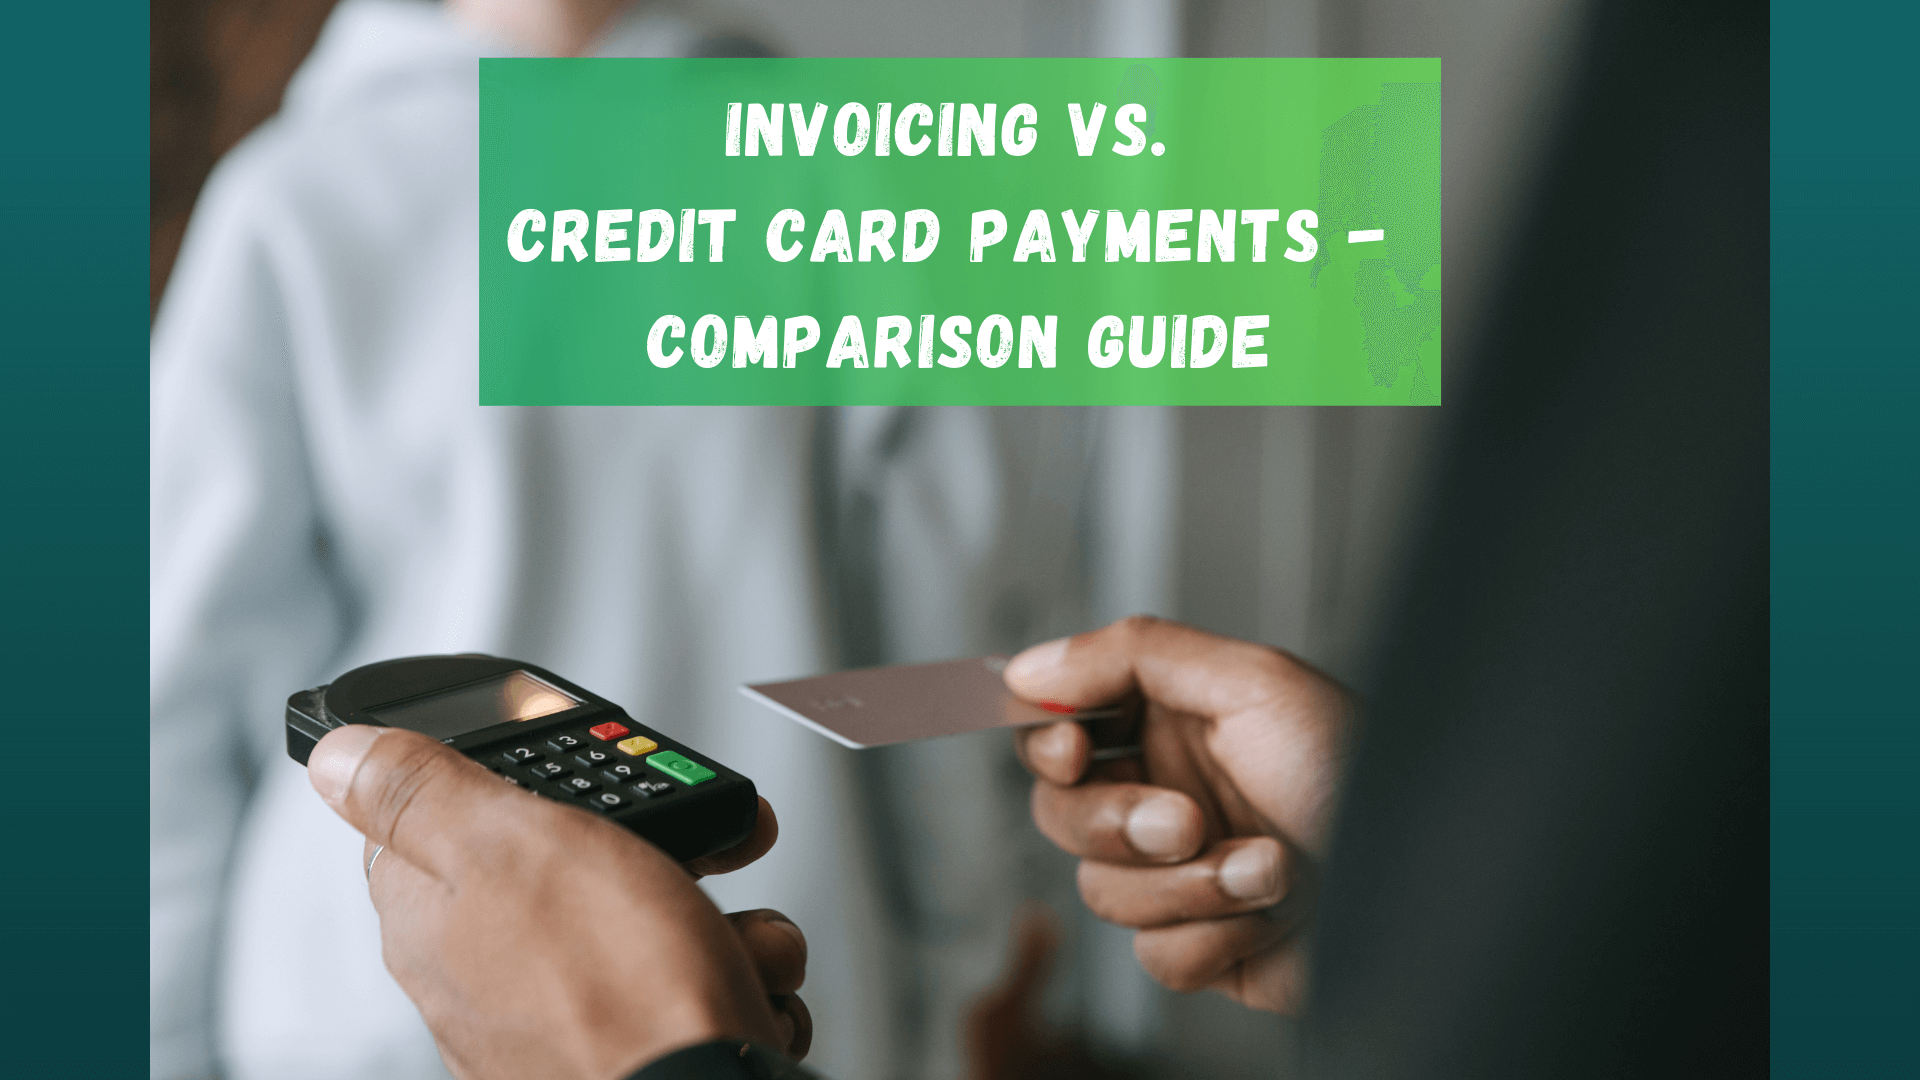 Decide whether to process invoices or credit card payments. Read the pros and cons to know which one works best for your business.